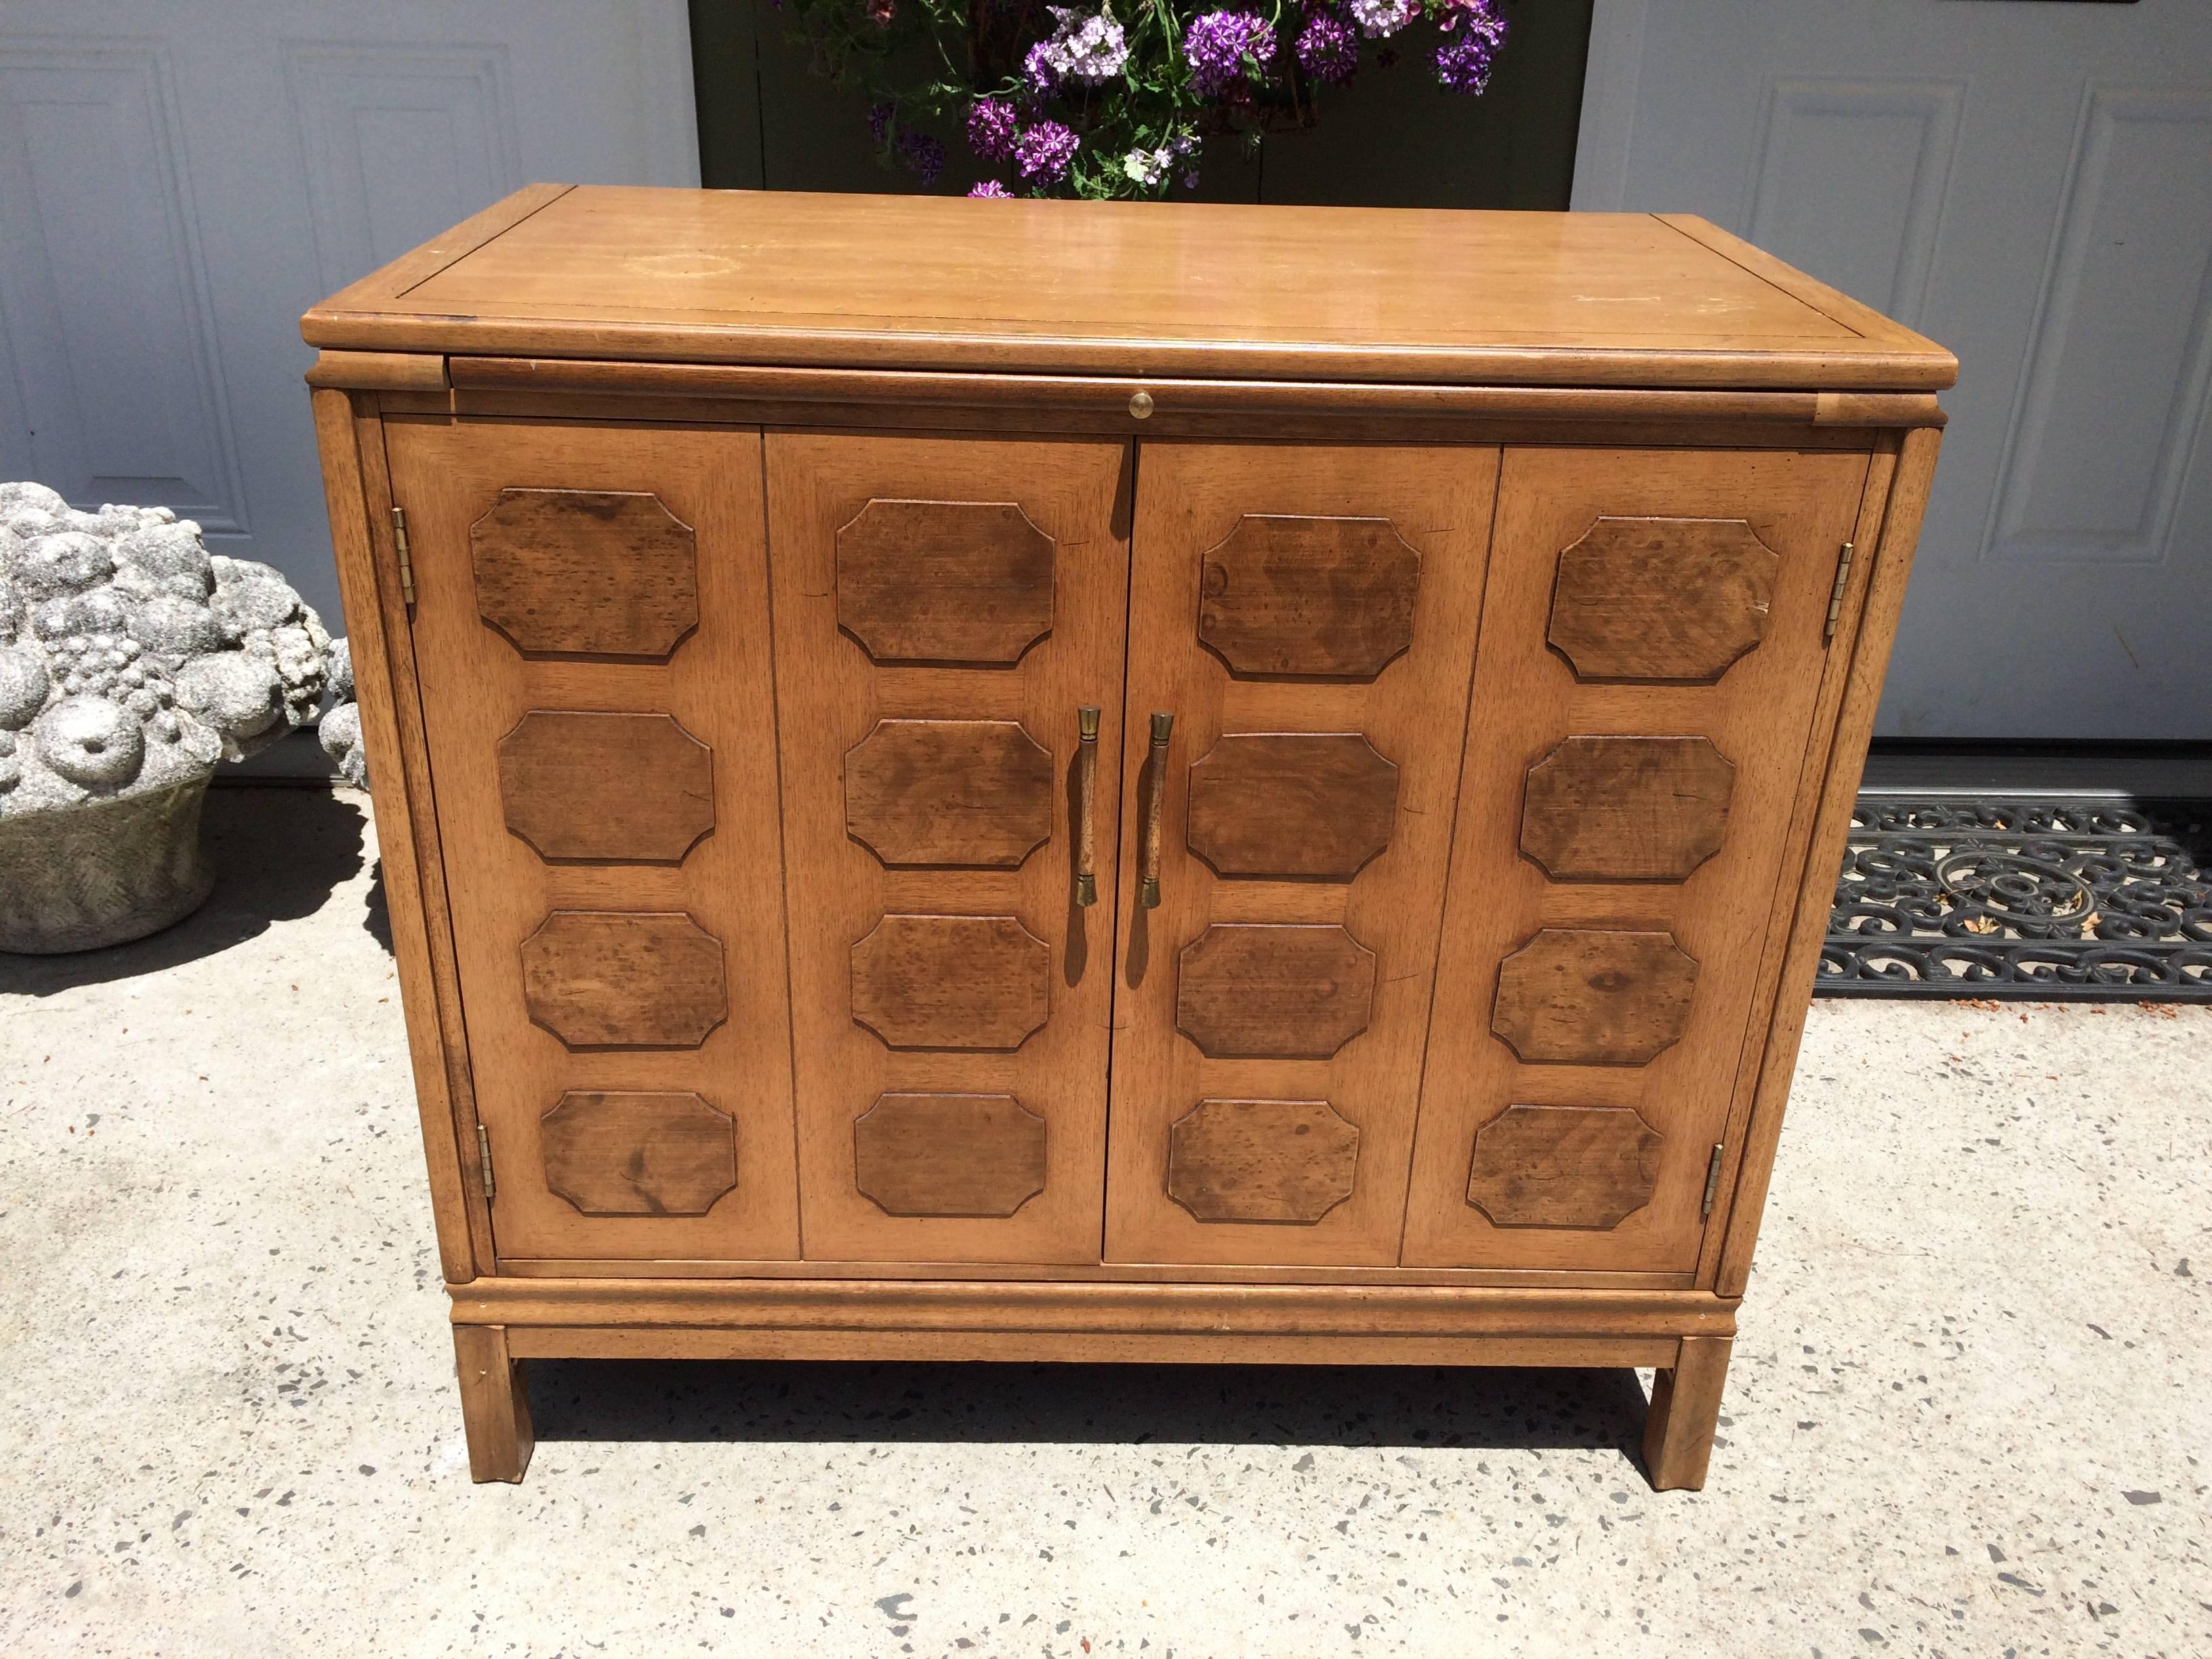 Paneled Mid-Century Bar cabinet Signed Tamerlane by Thomasville. This sophisticated piece  has a black laminate pullout for pouring drinks, two cabinet doors that open to store glasses and liquor and a drawer for corkscrews, bottle openers and other